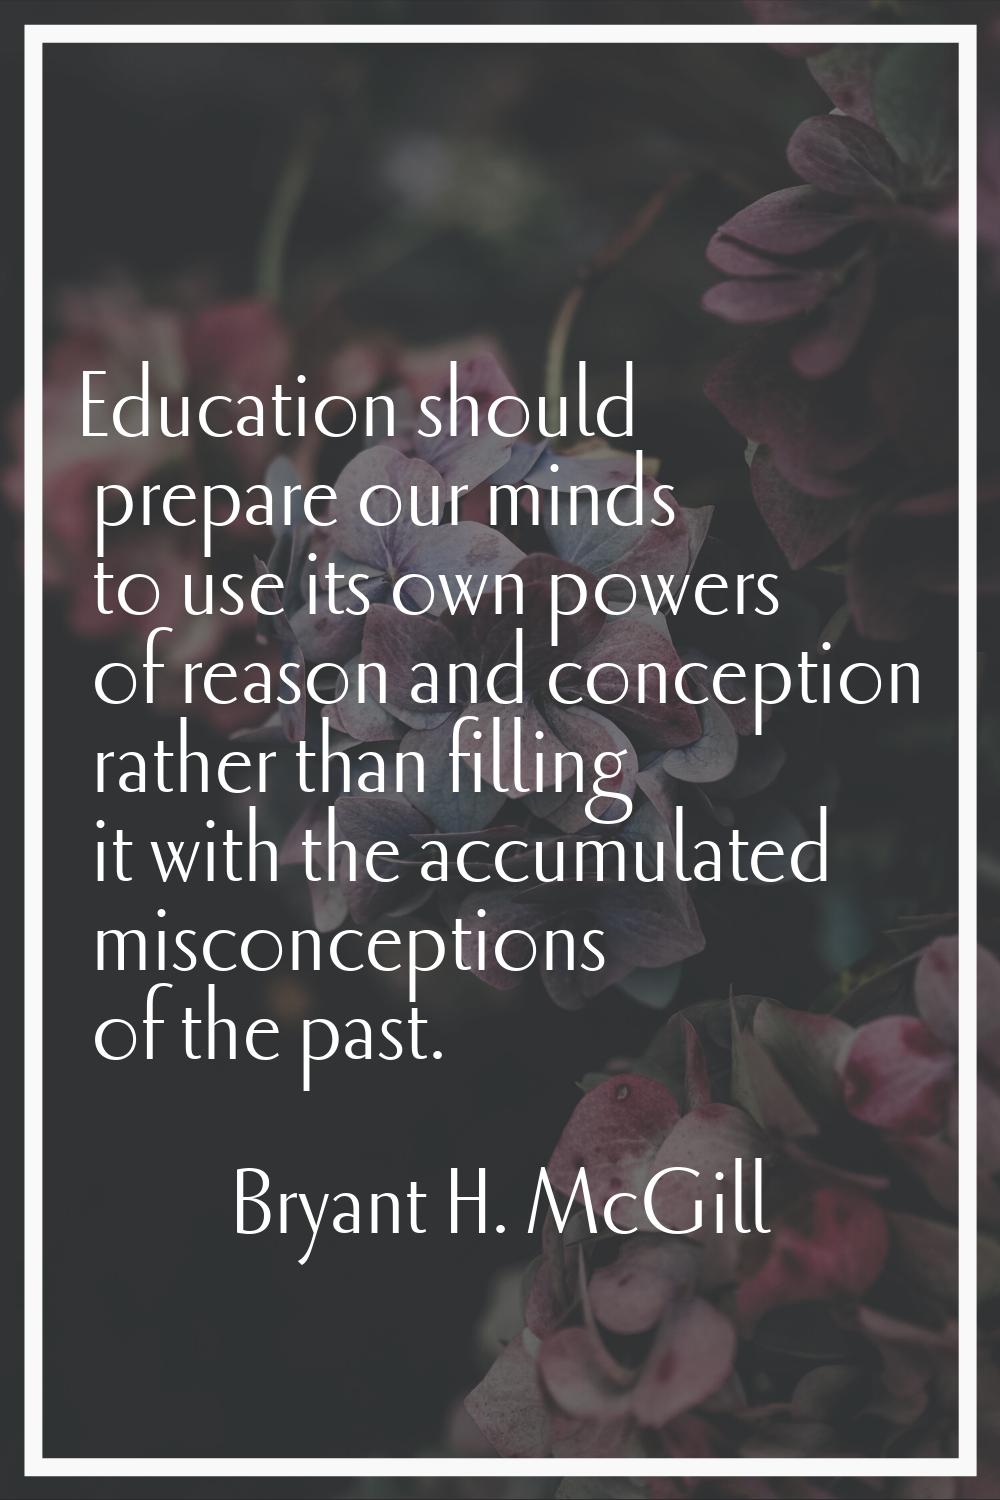 Education should prepare our minds to use its own powers of reason and conception rather than filli